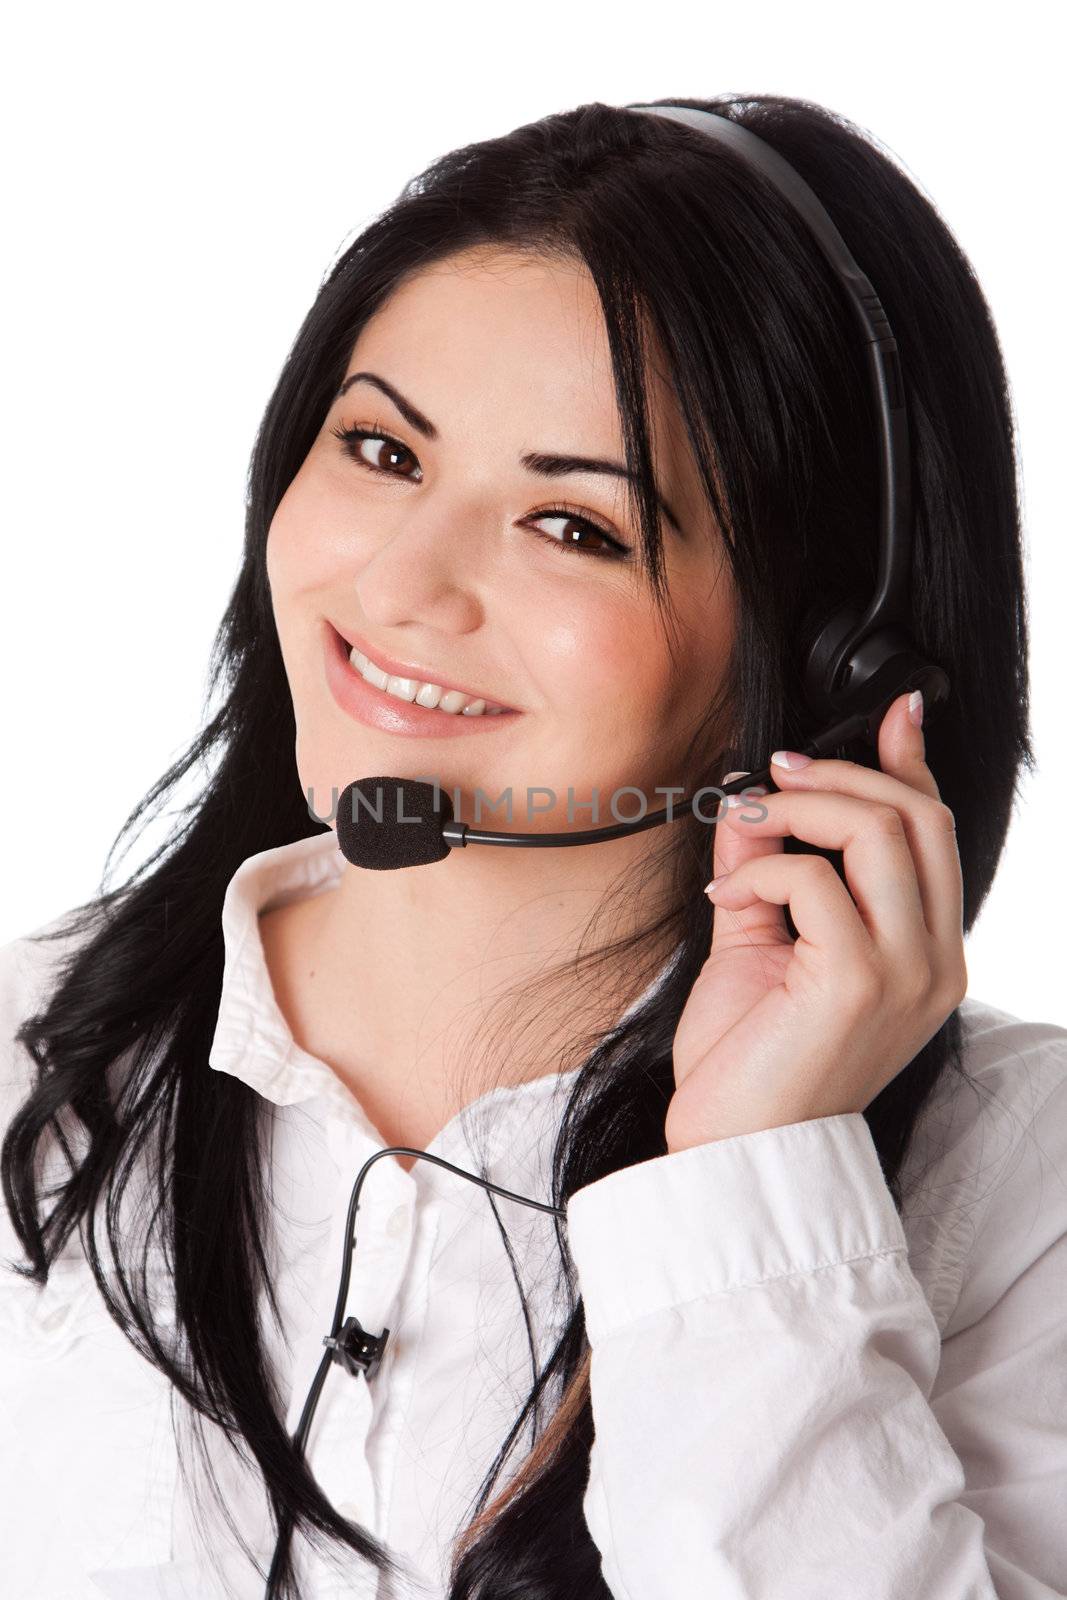 Beautiful happy customer service representative at call center office with headset, isolated.